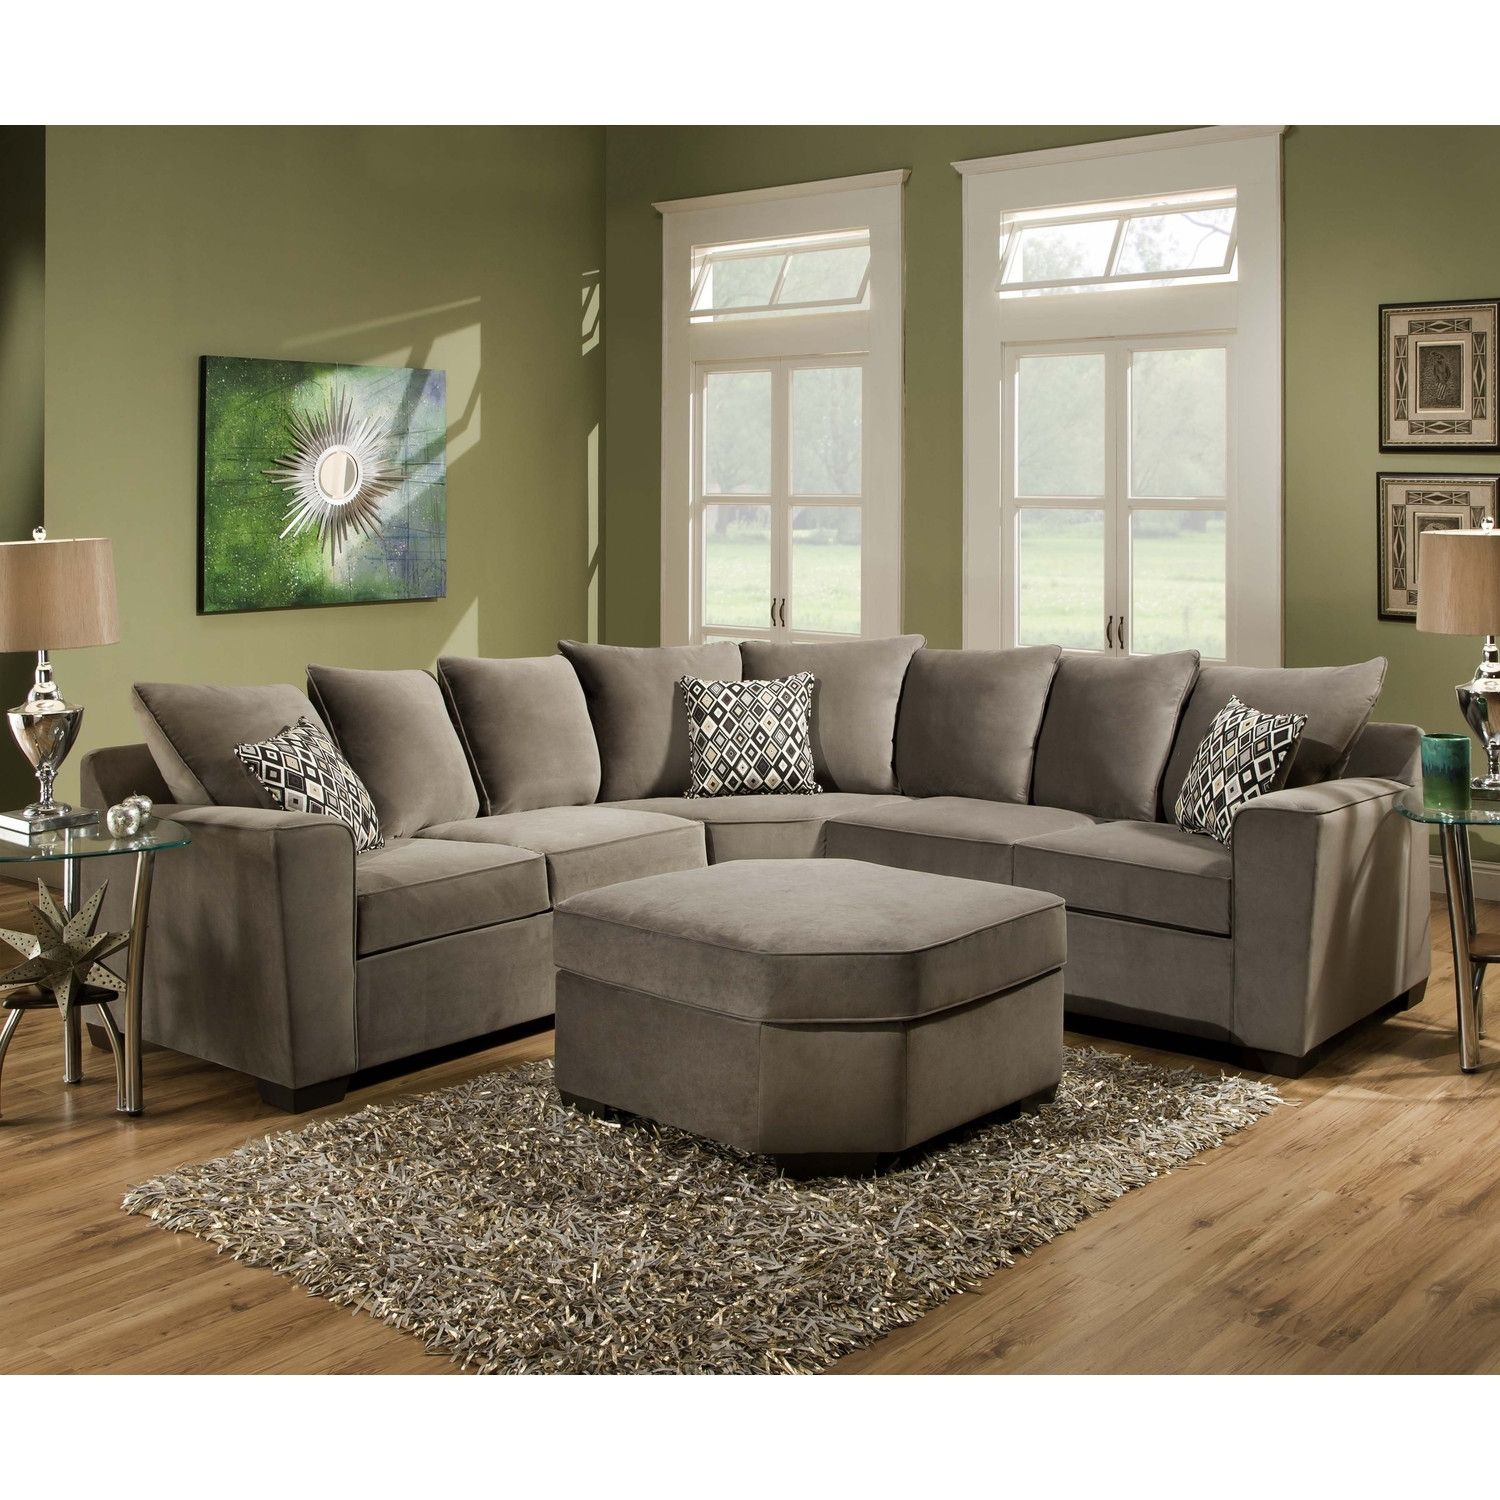 Lovely Plush Sectional Sofas 26 On Loveseat Twin Sleeper Sofa With In Plush Sectional Sofas (Photo 7 of 10)